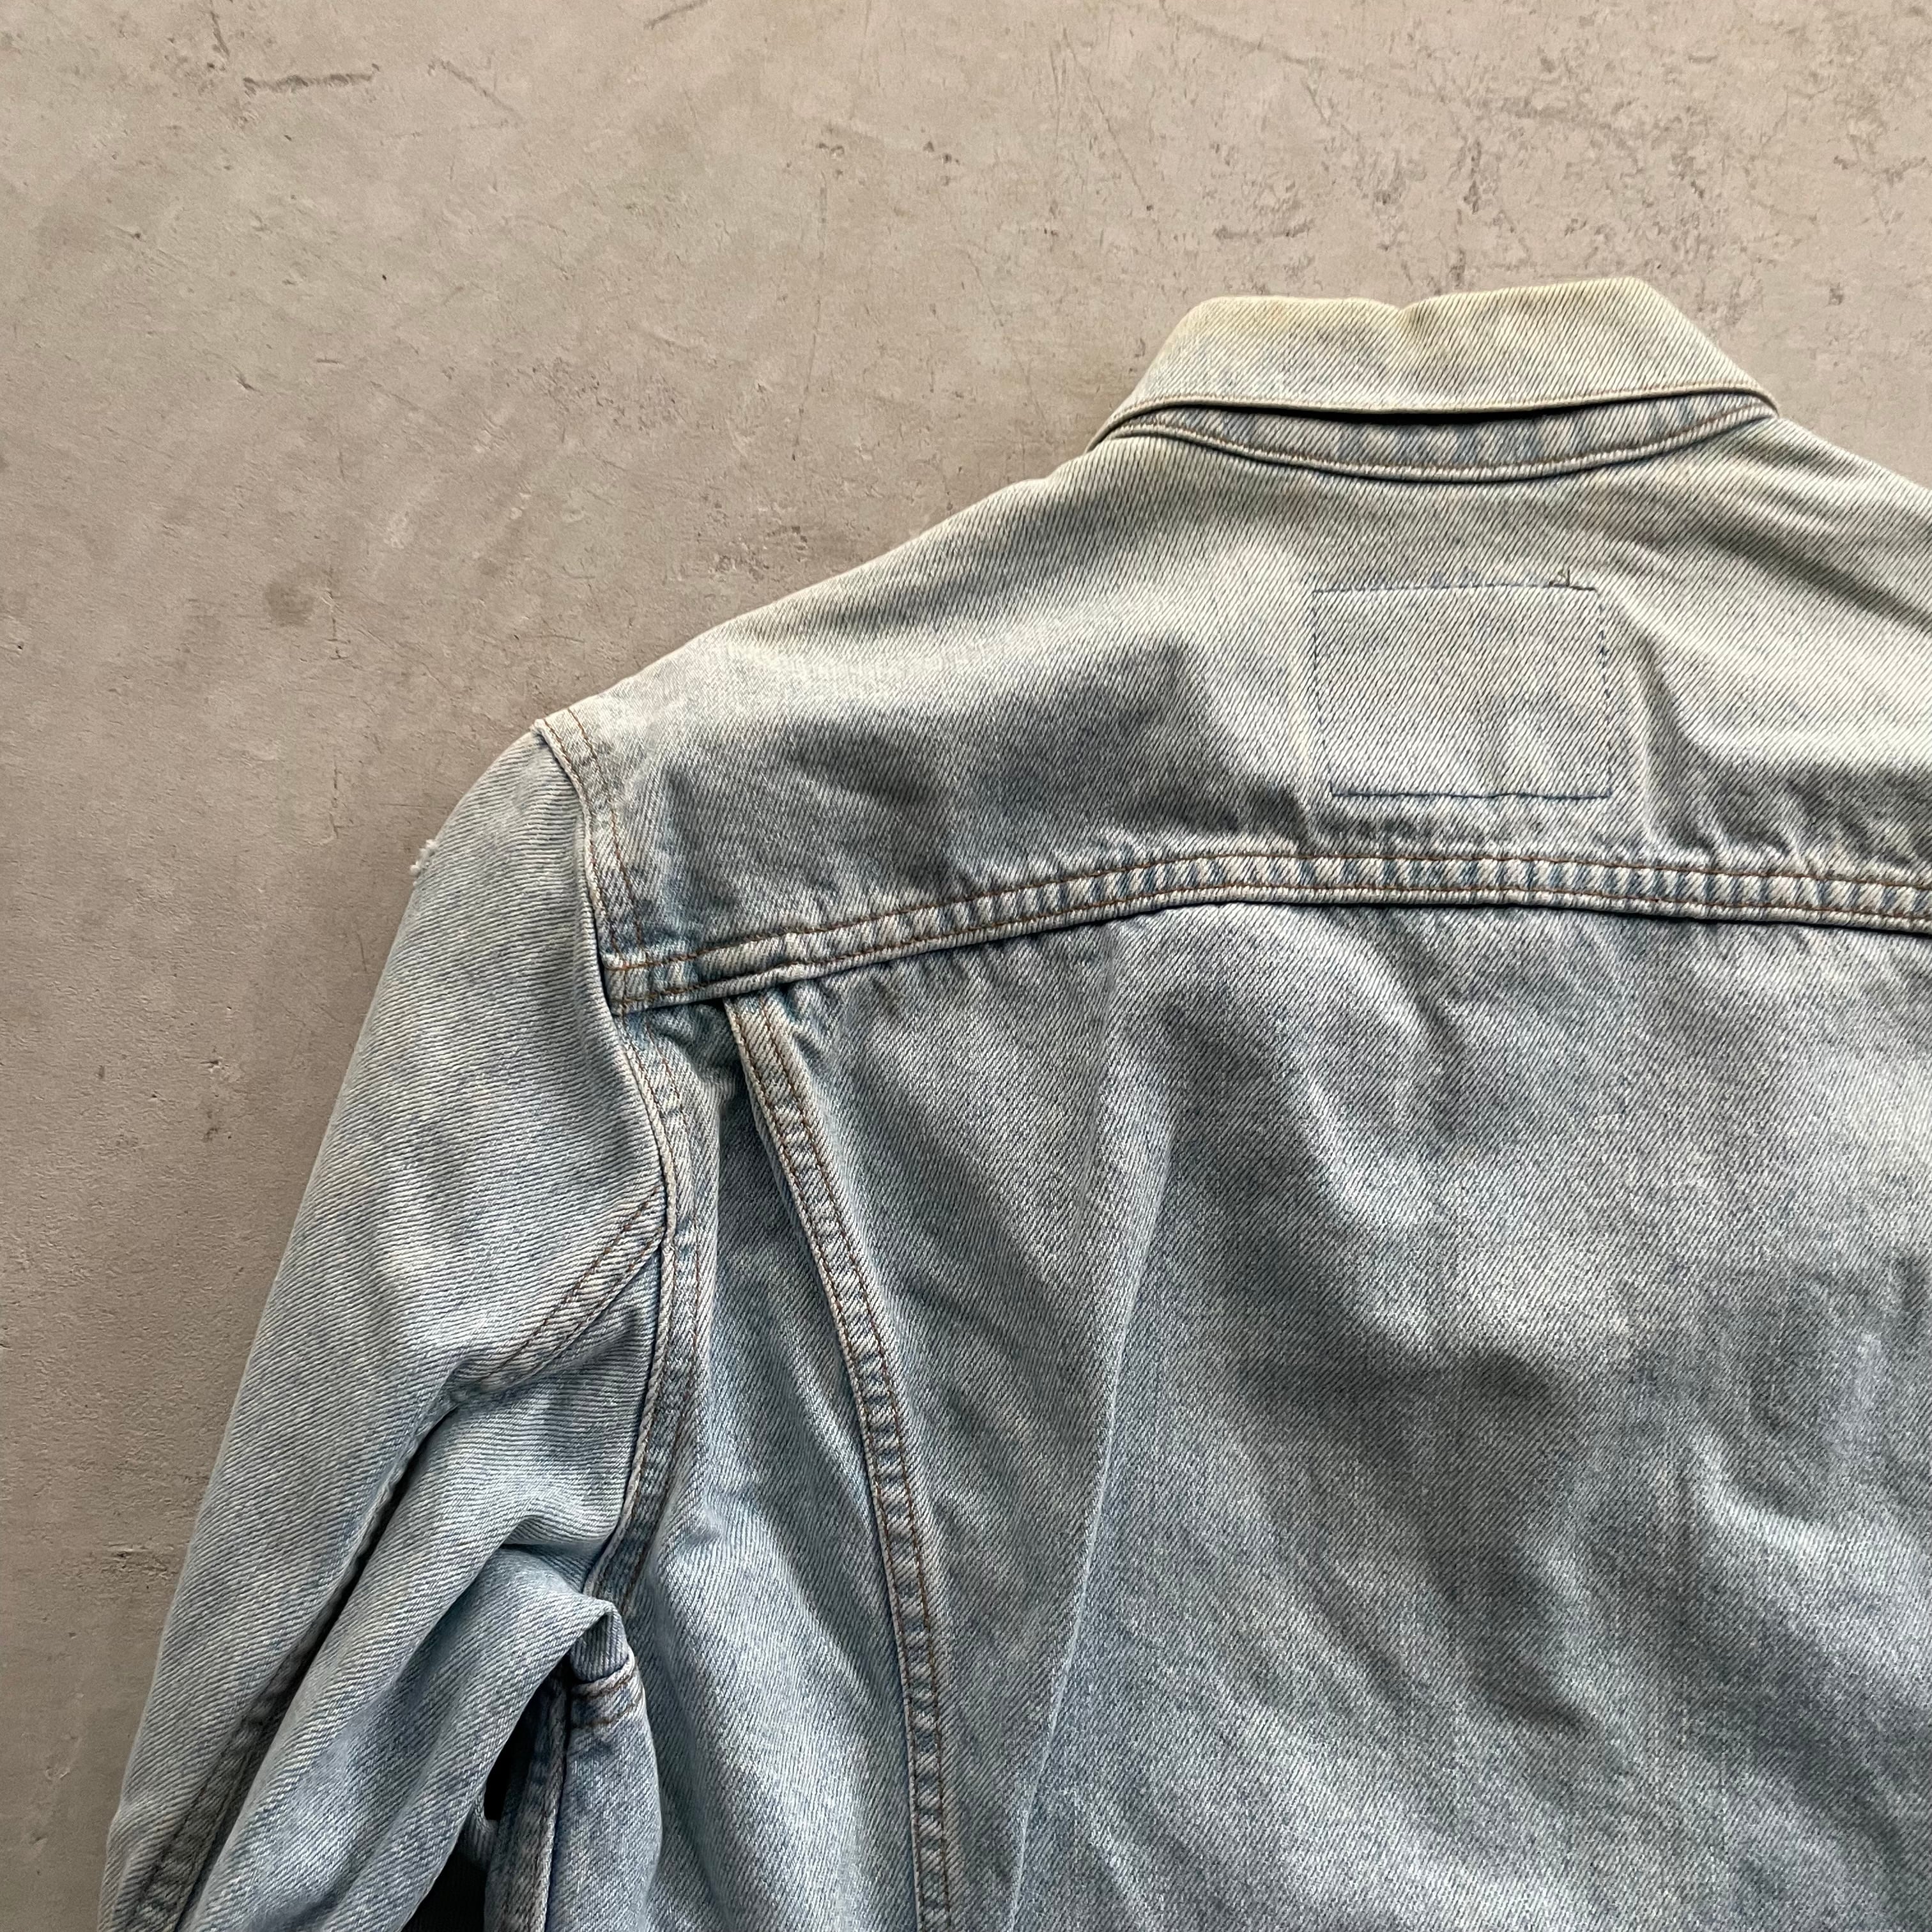 Levi's/90s ice blue denim jacket 75506-4843 made in Canada 